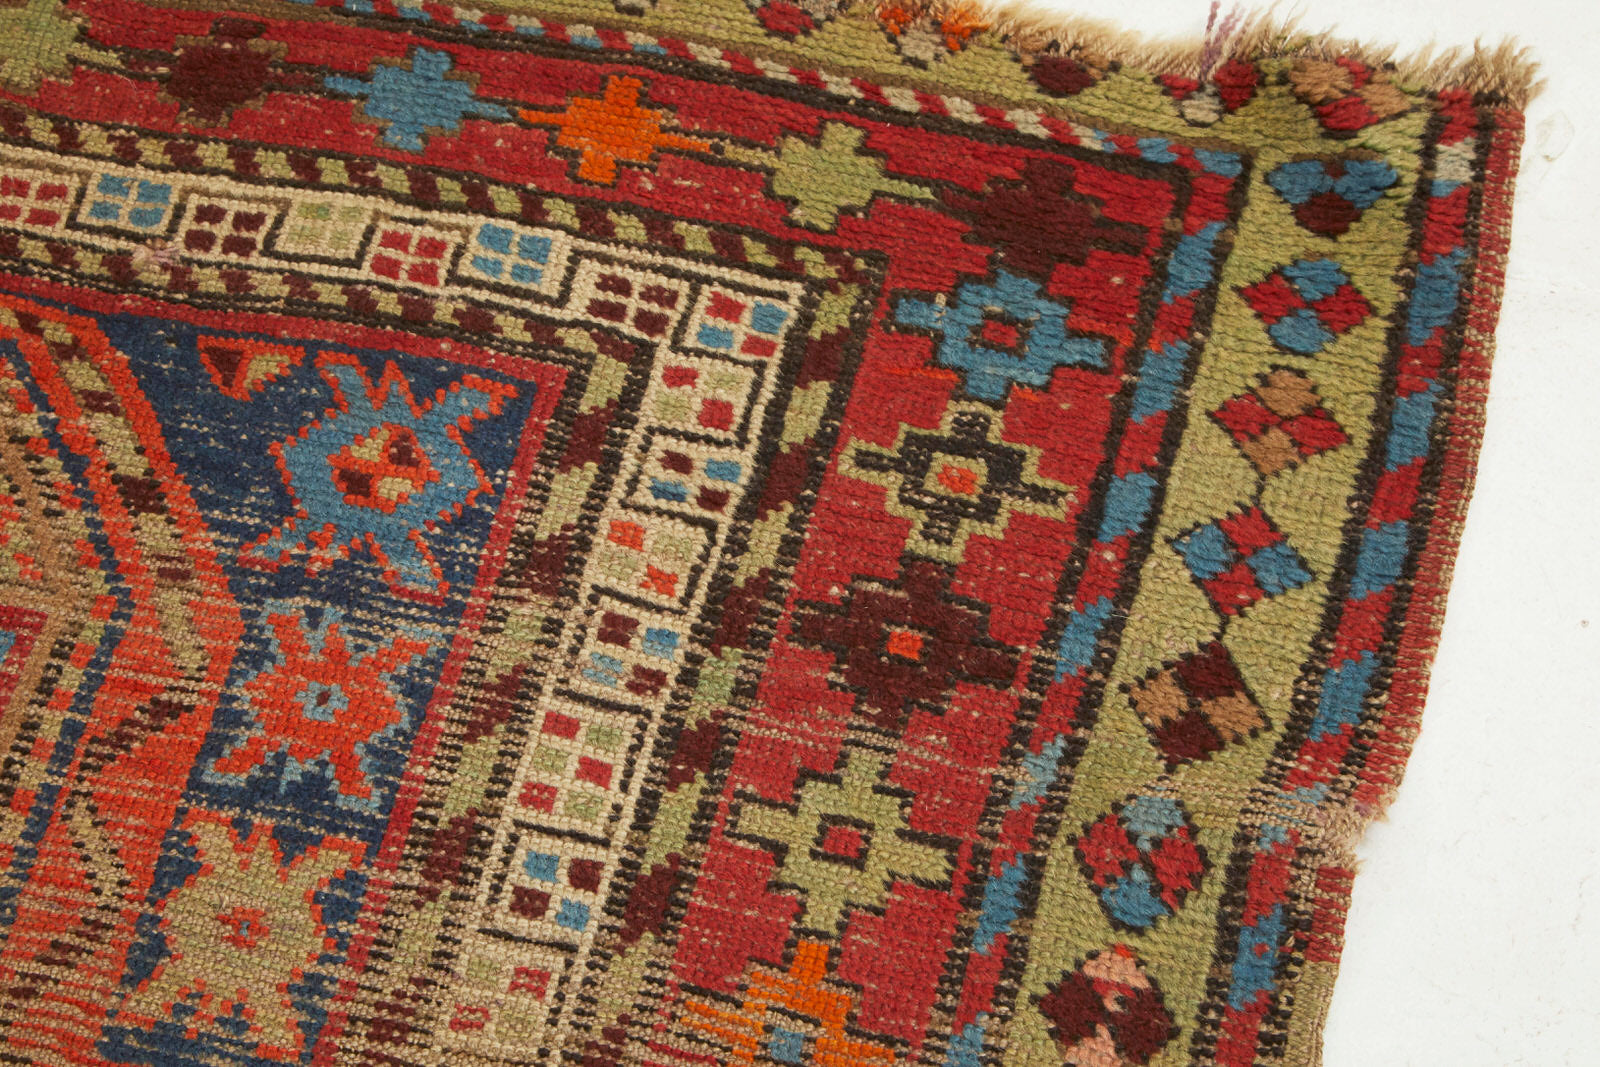 Border detail of Kazak Persian Caucasian Rug with red, brown, blue and orange colors vailable from King Kennedy Rugs Los Angeles 